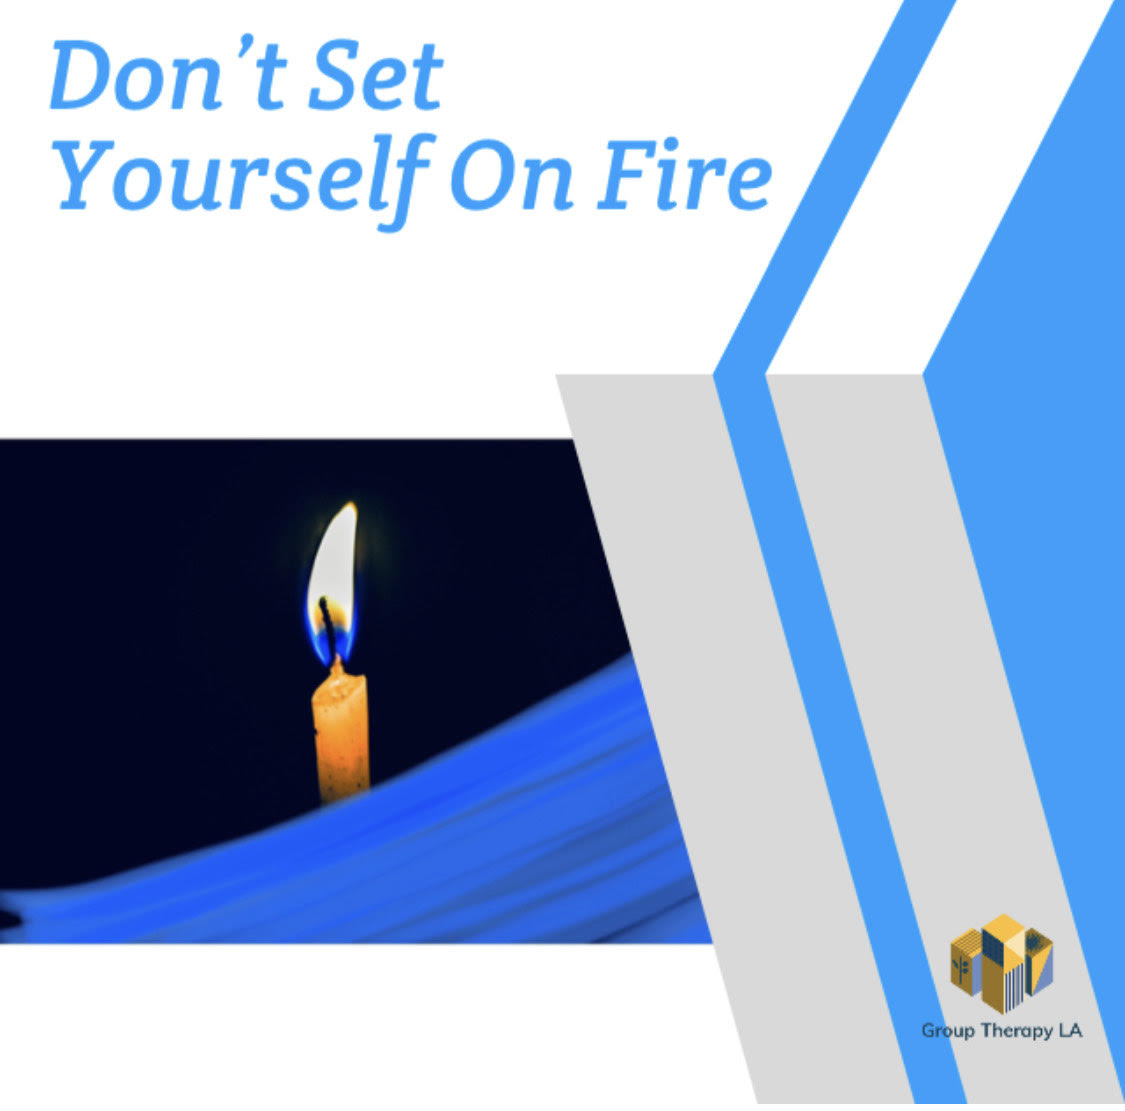 Don’t set yourself on fire